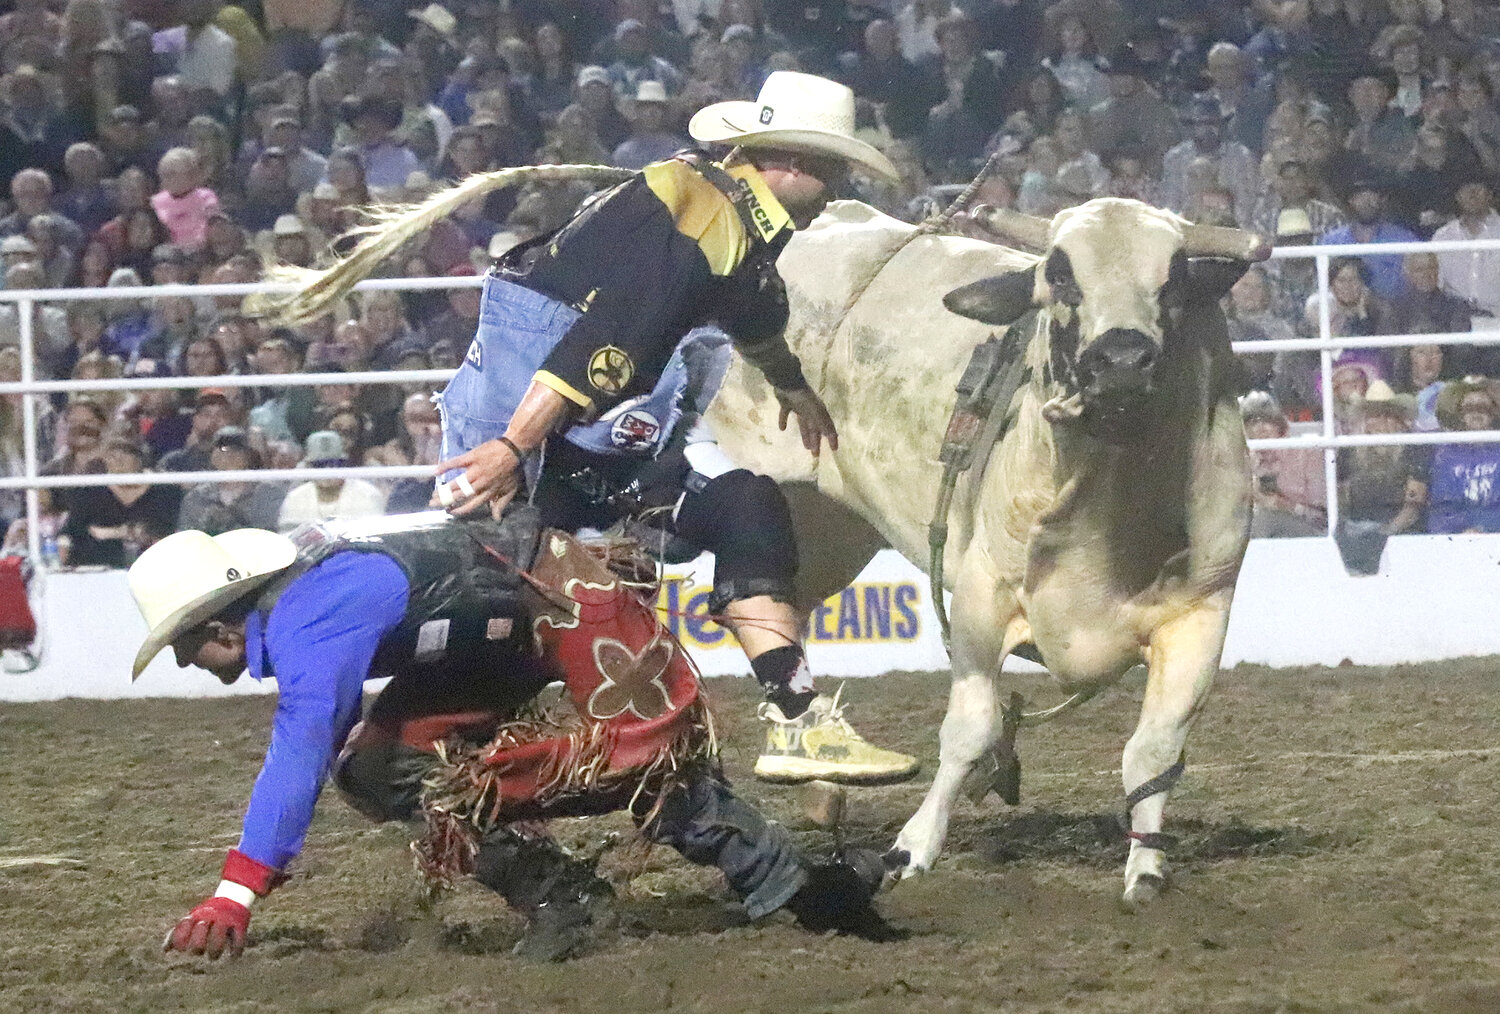 The 75th edition of the Tri-State Rodeo is sure to go down in the record books as one of the most well-attended rodeos in history. General Chairman Chuck Kempker said this year's rodeo couldn't have been scripted any better.